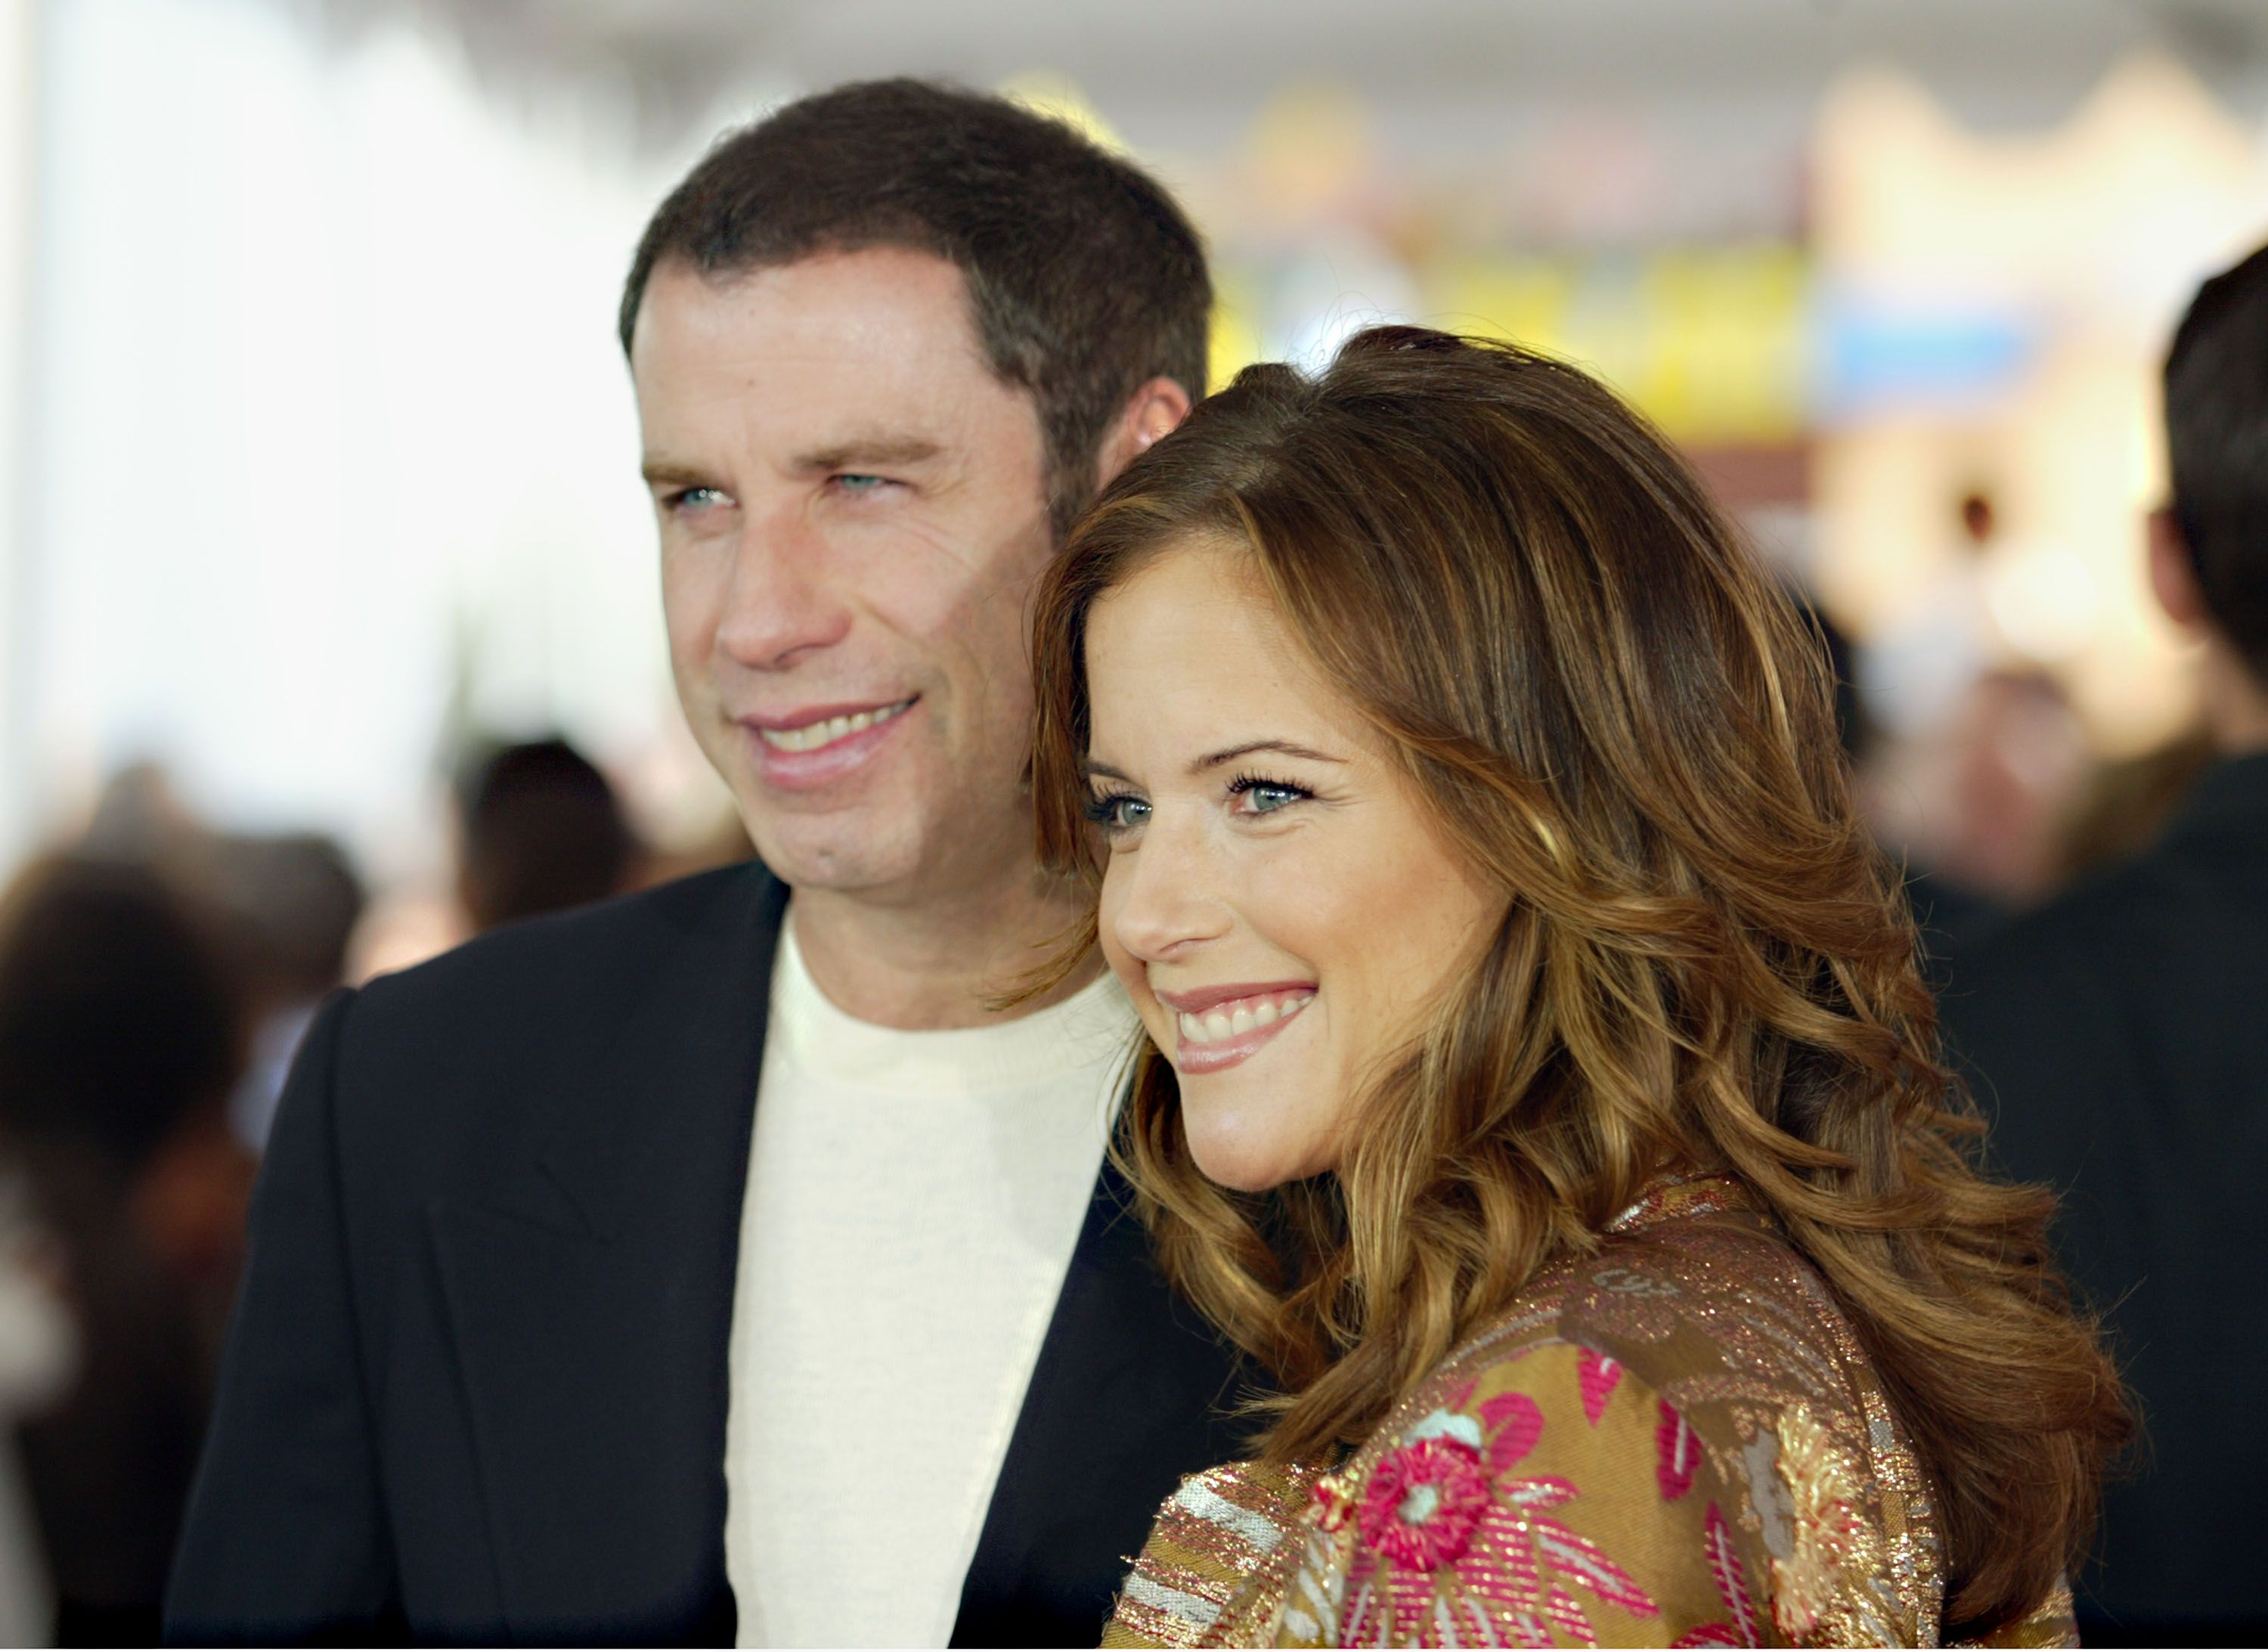 John Travolta and Kelly Preston at the world premiere of "Dr. Seuss' The Cat in the Hat" November 8, 2003, in Hollywood, California | Photo: Kevin Winter/Getty Images